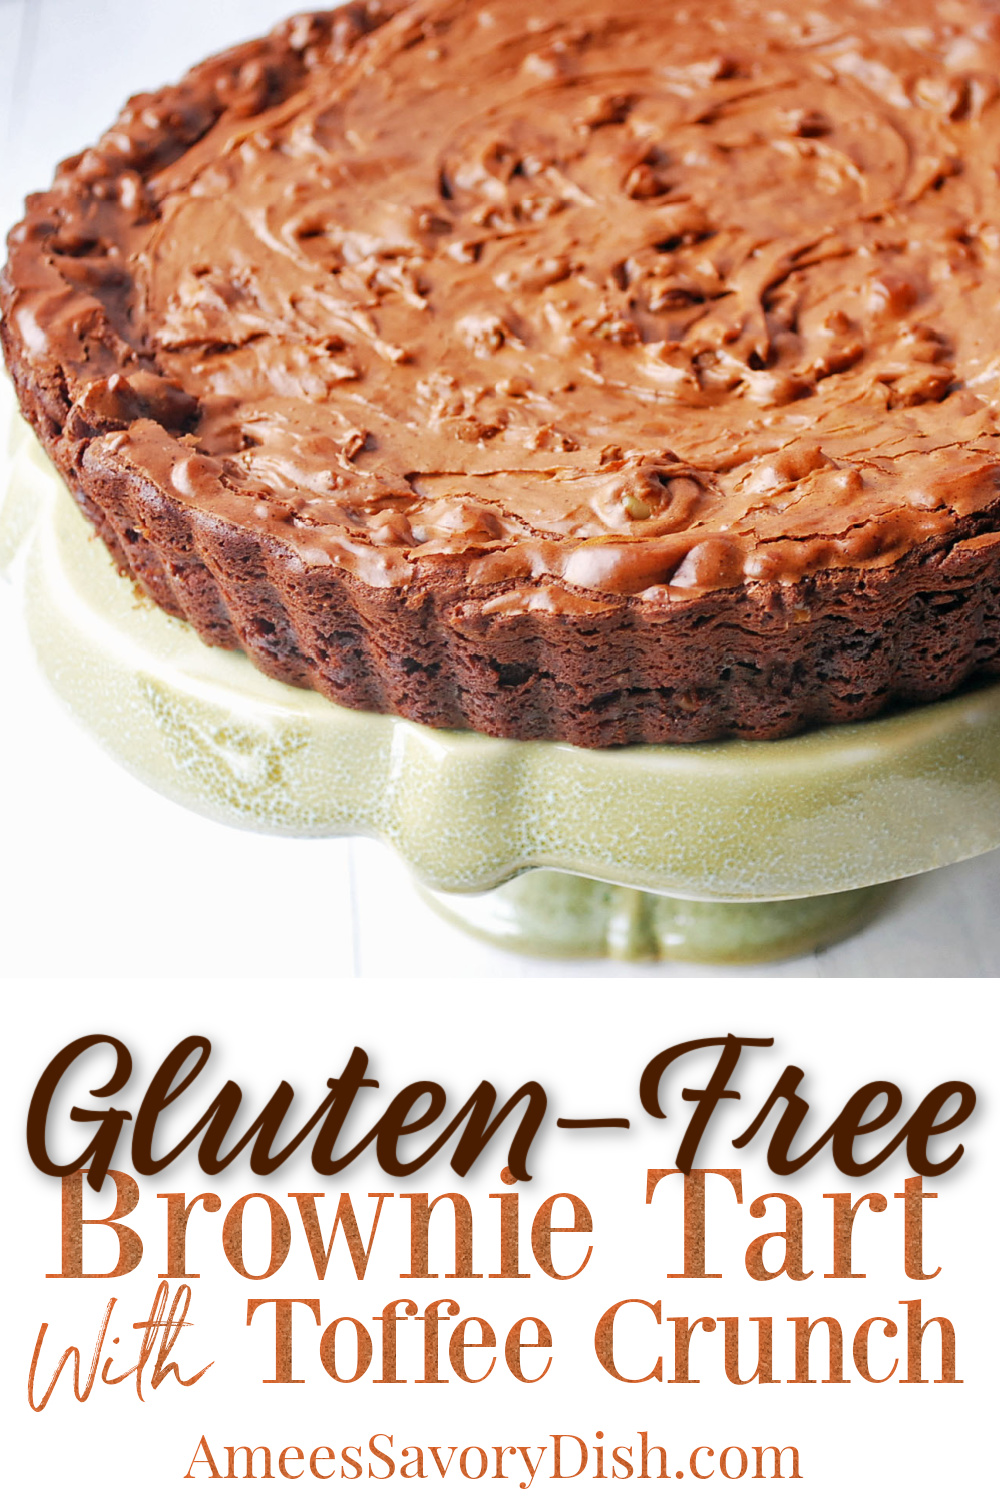 This gluten-free brownie tart is so good, you'll never guess it's gluten-free! Made with chocolate toffee bars for added flavor and texture. #glutenfreedesserts #glutenfreebrownie #brownierecipe #chocolatetart via @Ameessavorydish